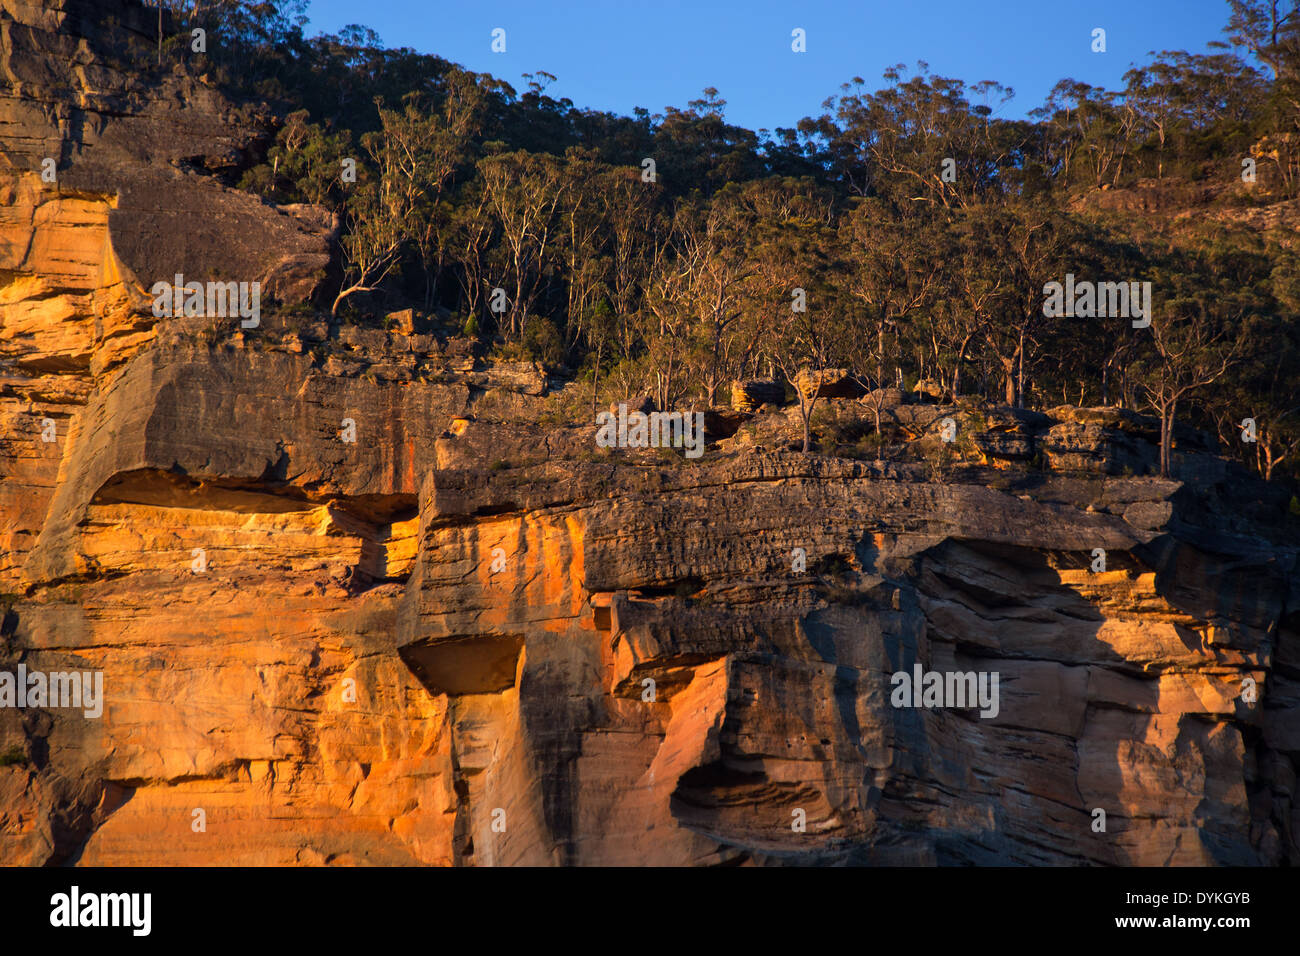 Rugged sandstone cliffs in warm late afternoon sunlight, Wollemi National Park, NSW, Australia Stock Photo